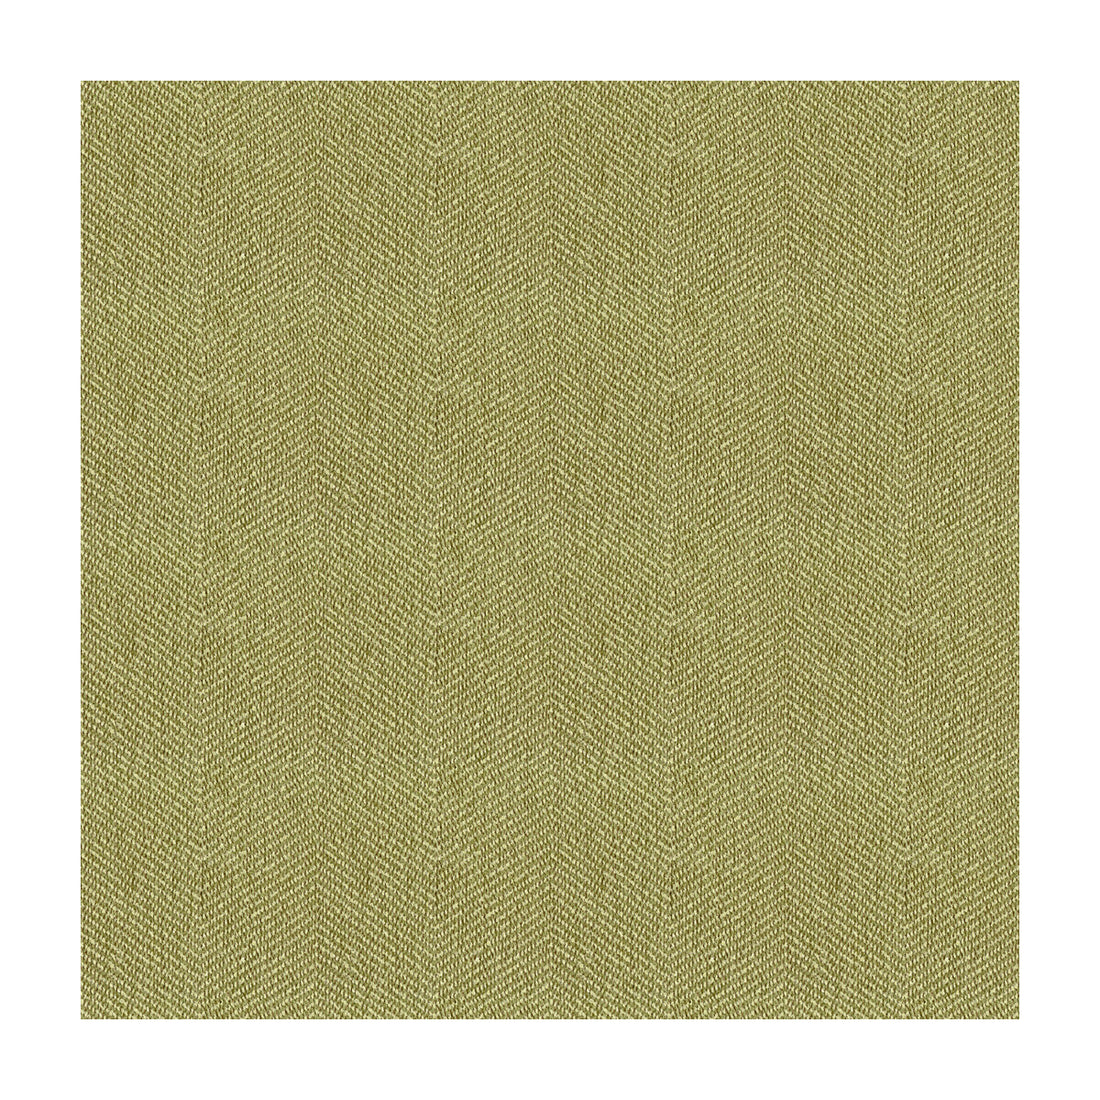 Kravet Contract fabric in 33877-3 color - pattern 33877.3.0 - by Kravet Contract in the Crypton Incase collection